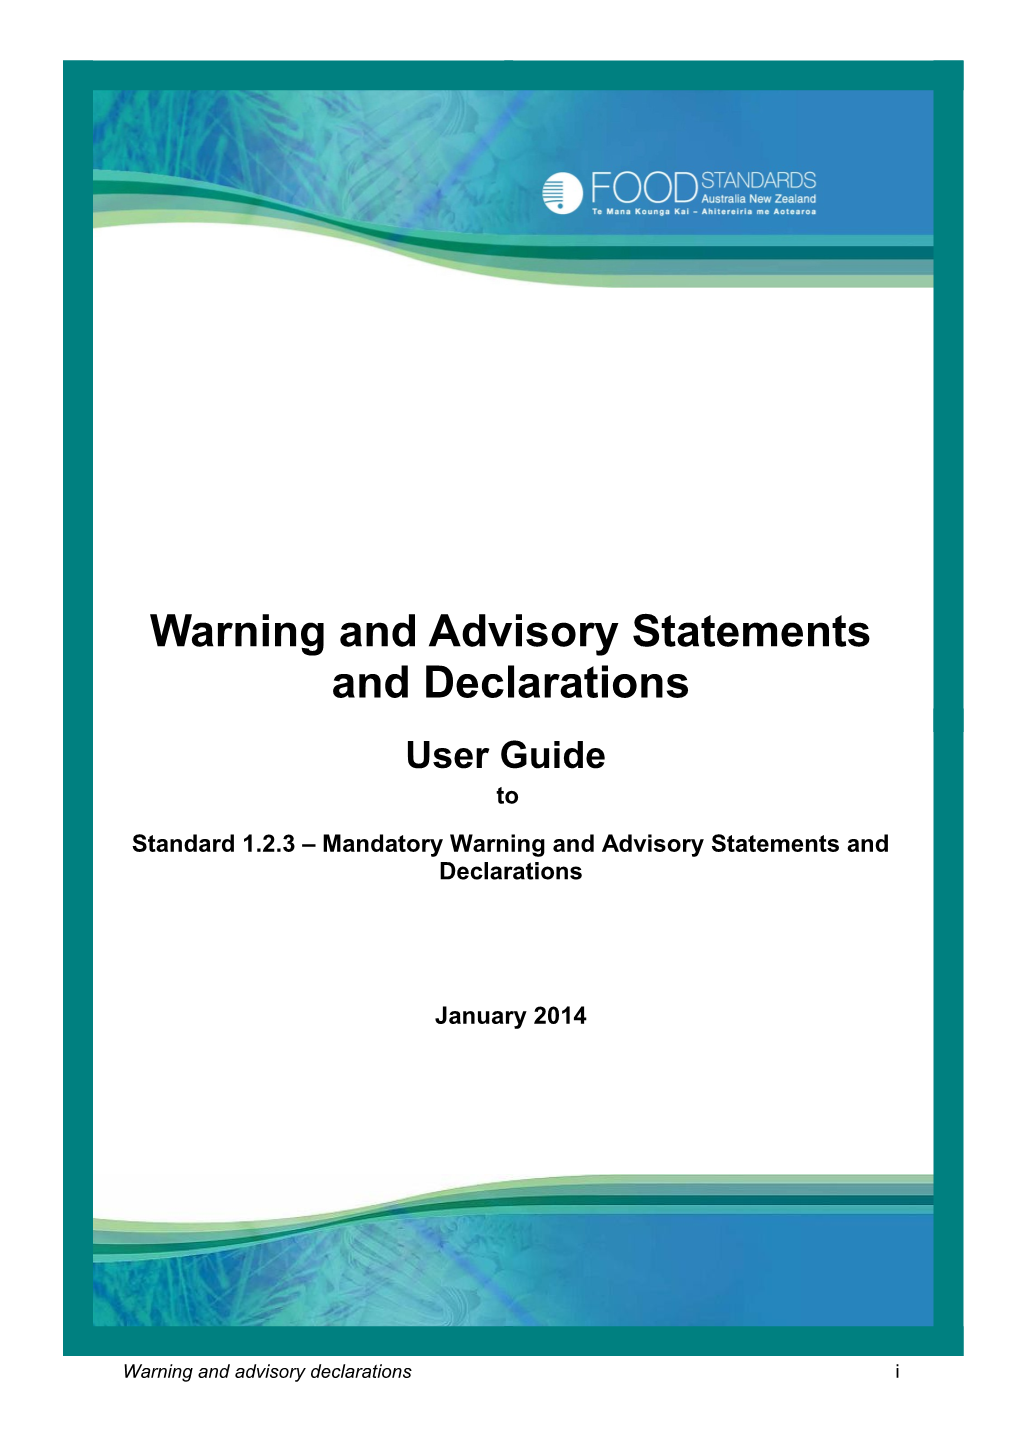 Warning and Advisory Statements and Declarations